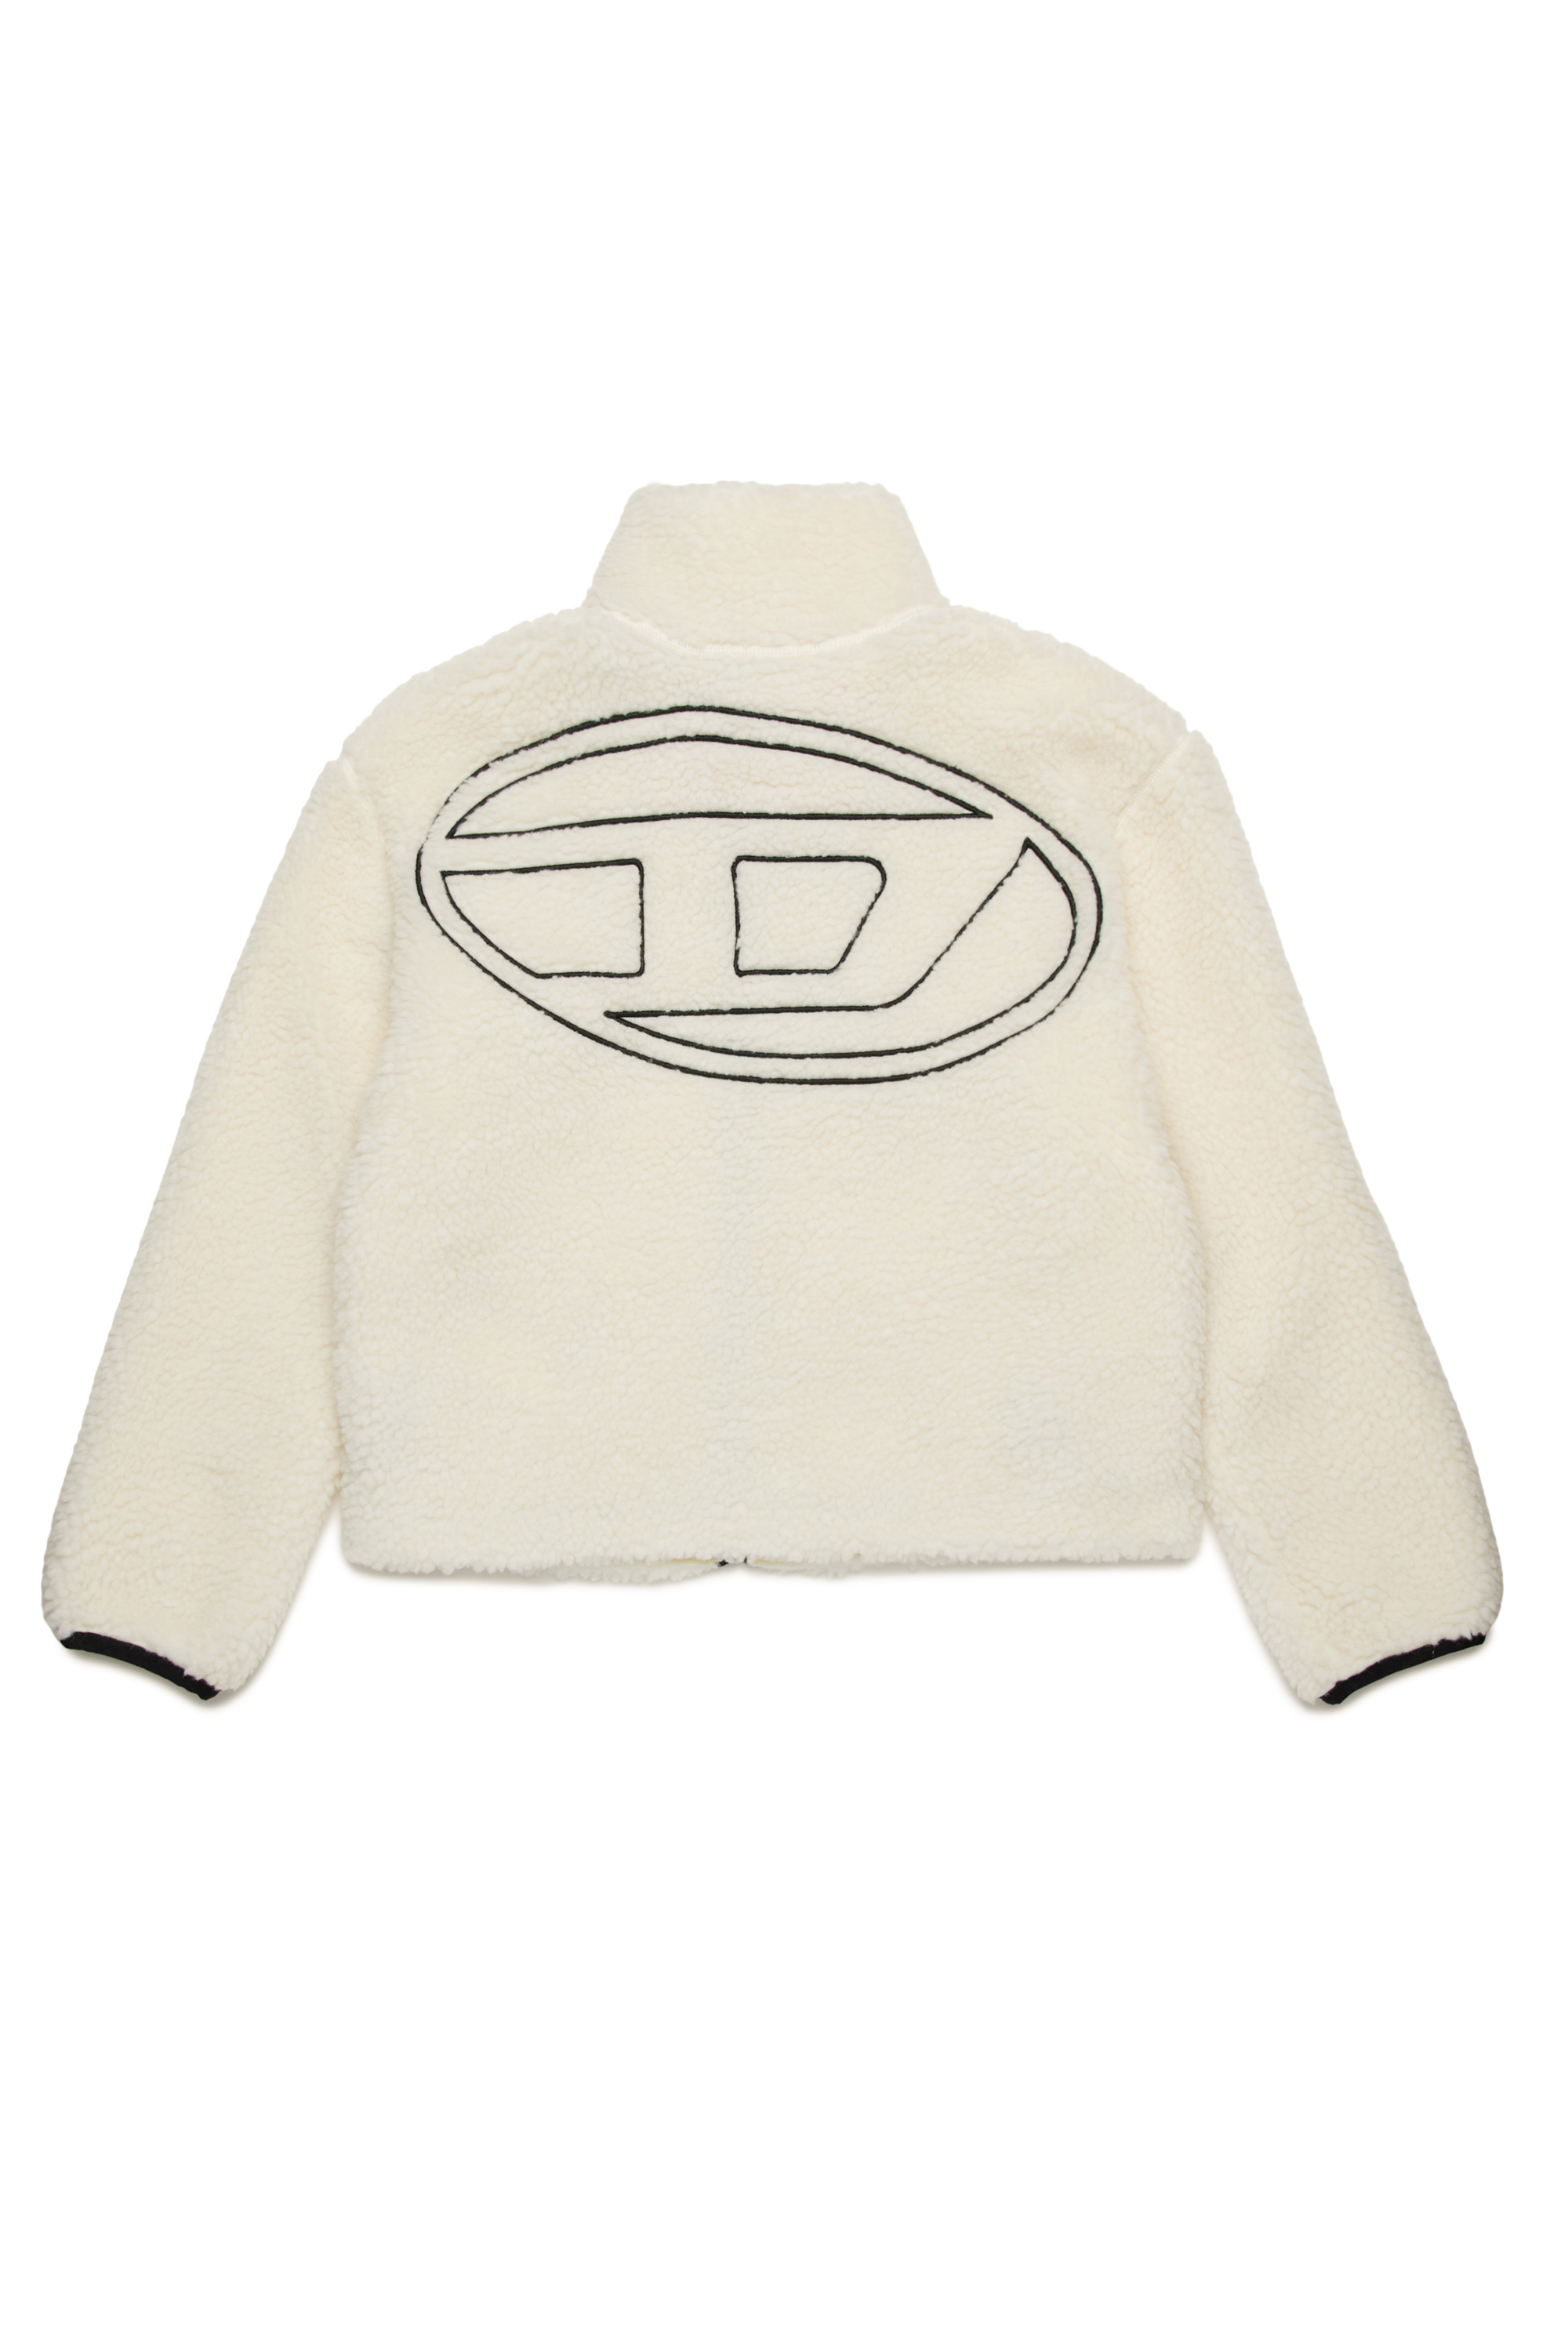 Diesel - JFCHIBI, Donna Giacca teddy con logo Oval D in Bianco - Image 2